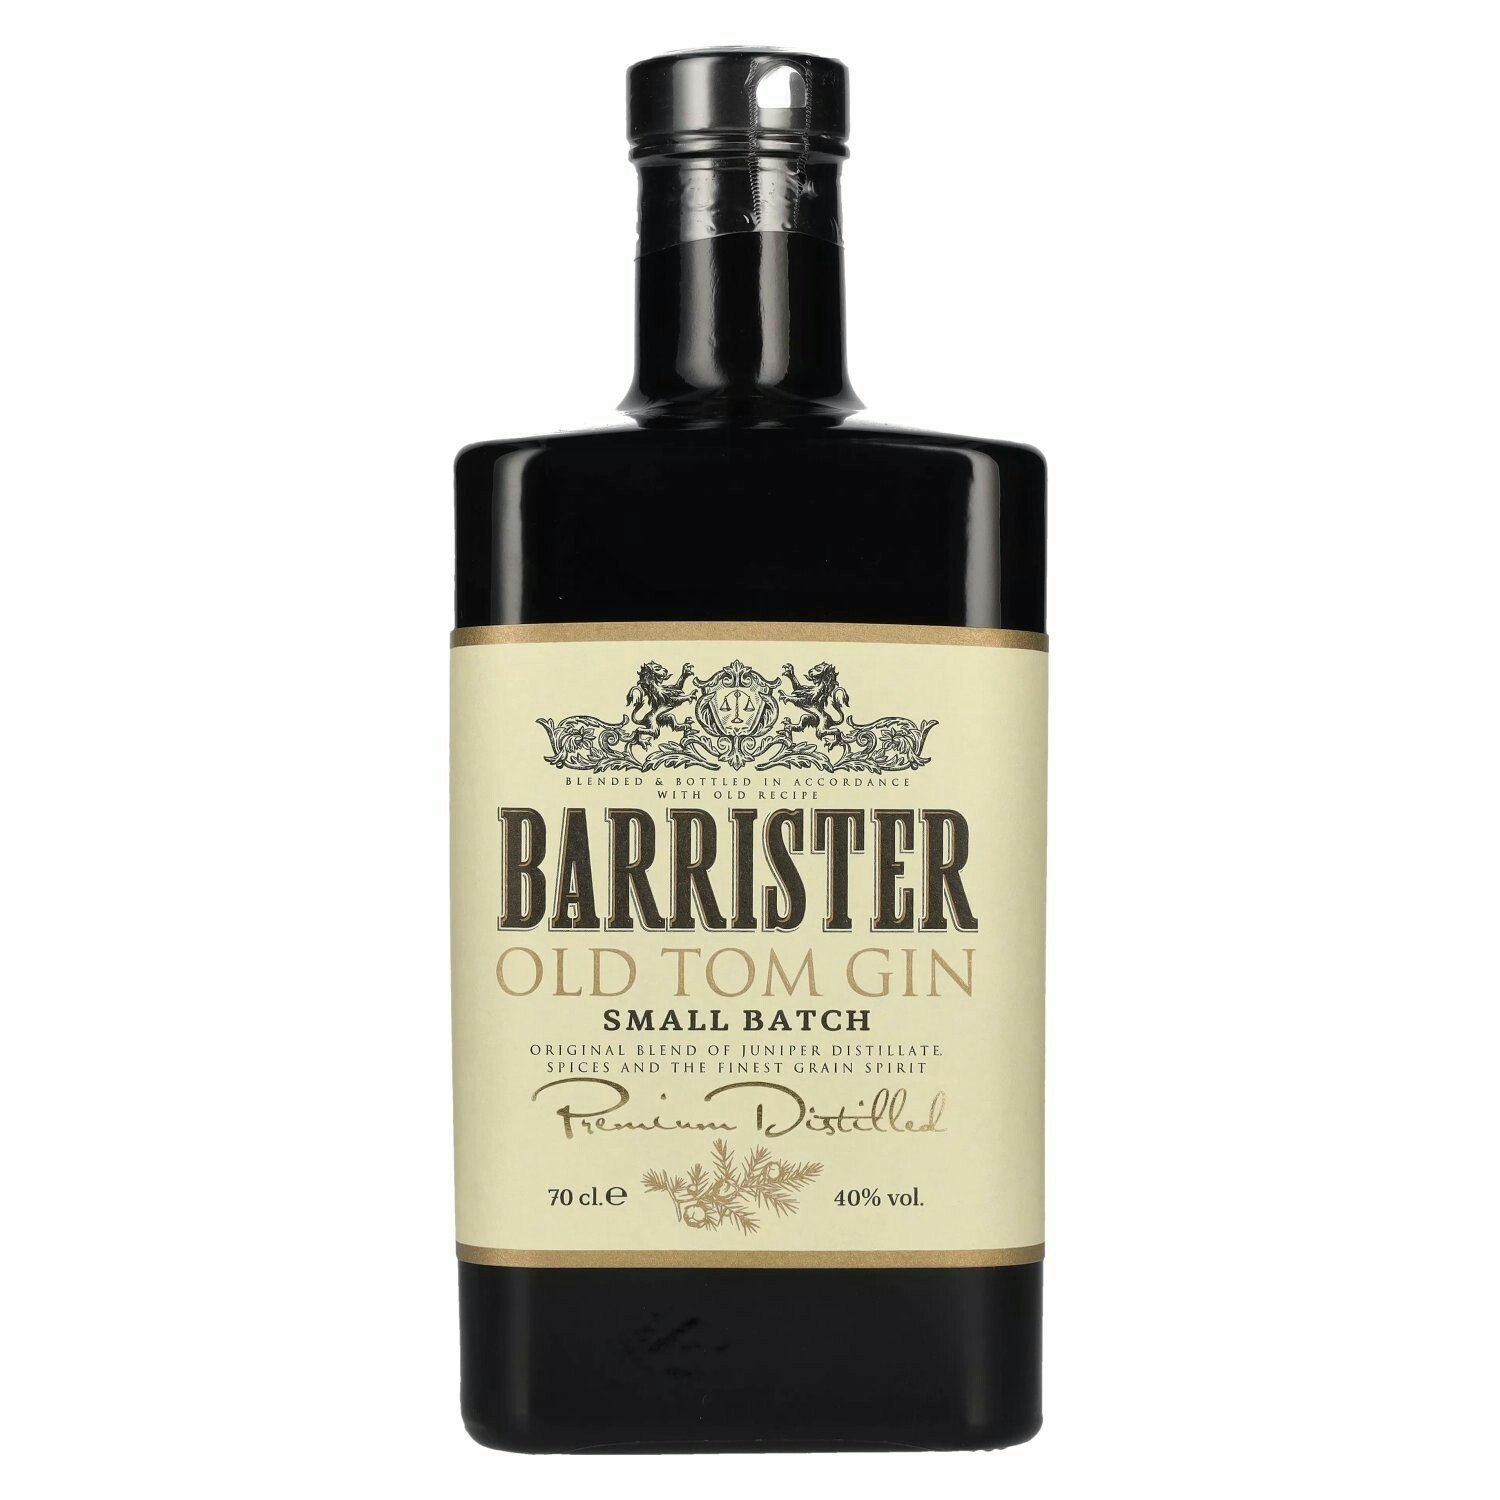 Barrister Old Tom Gin Small Batch 40% Vol. 0,7l